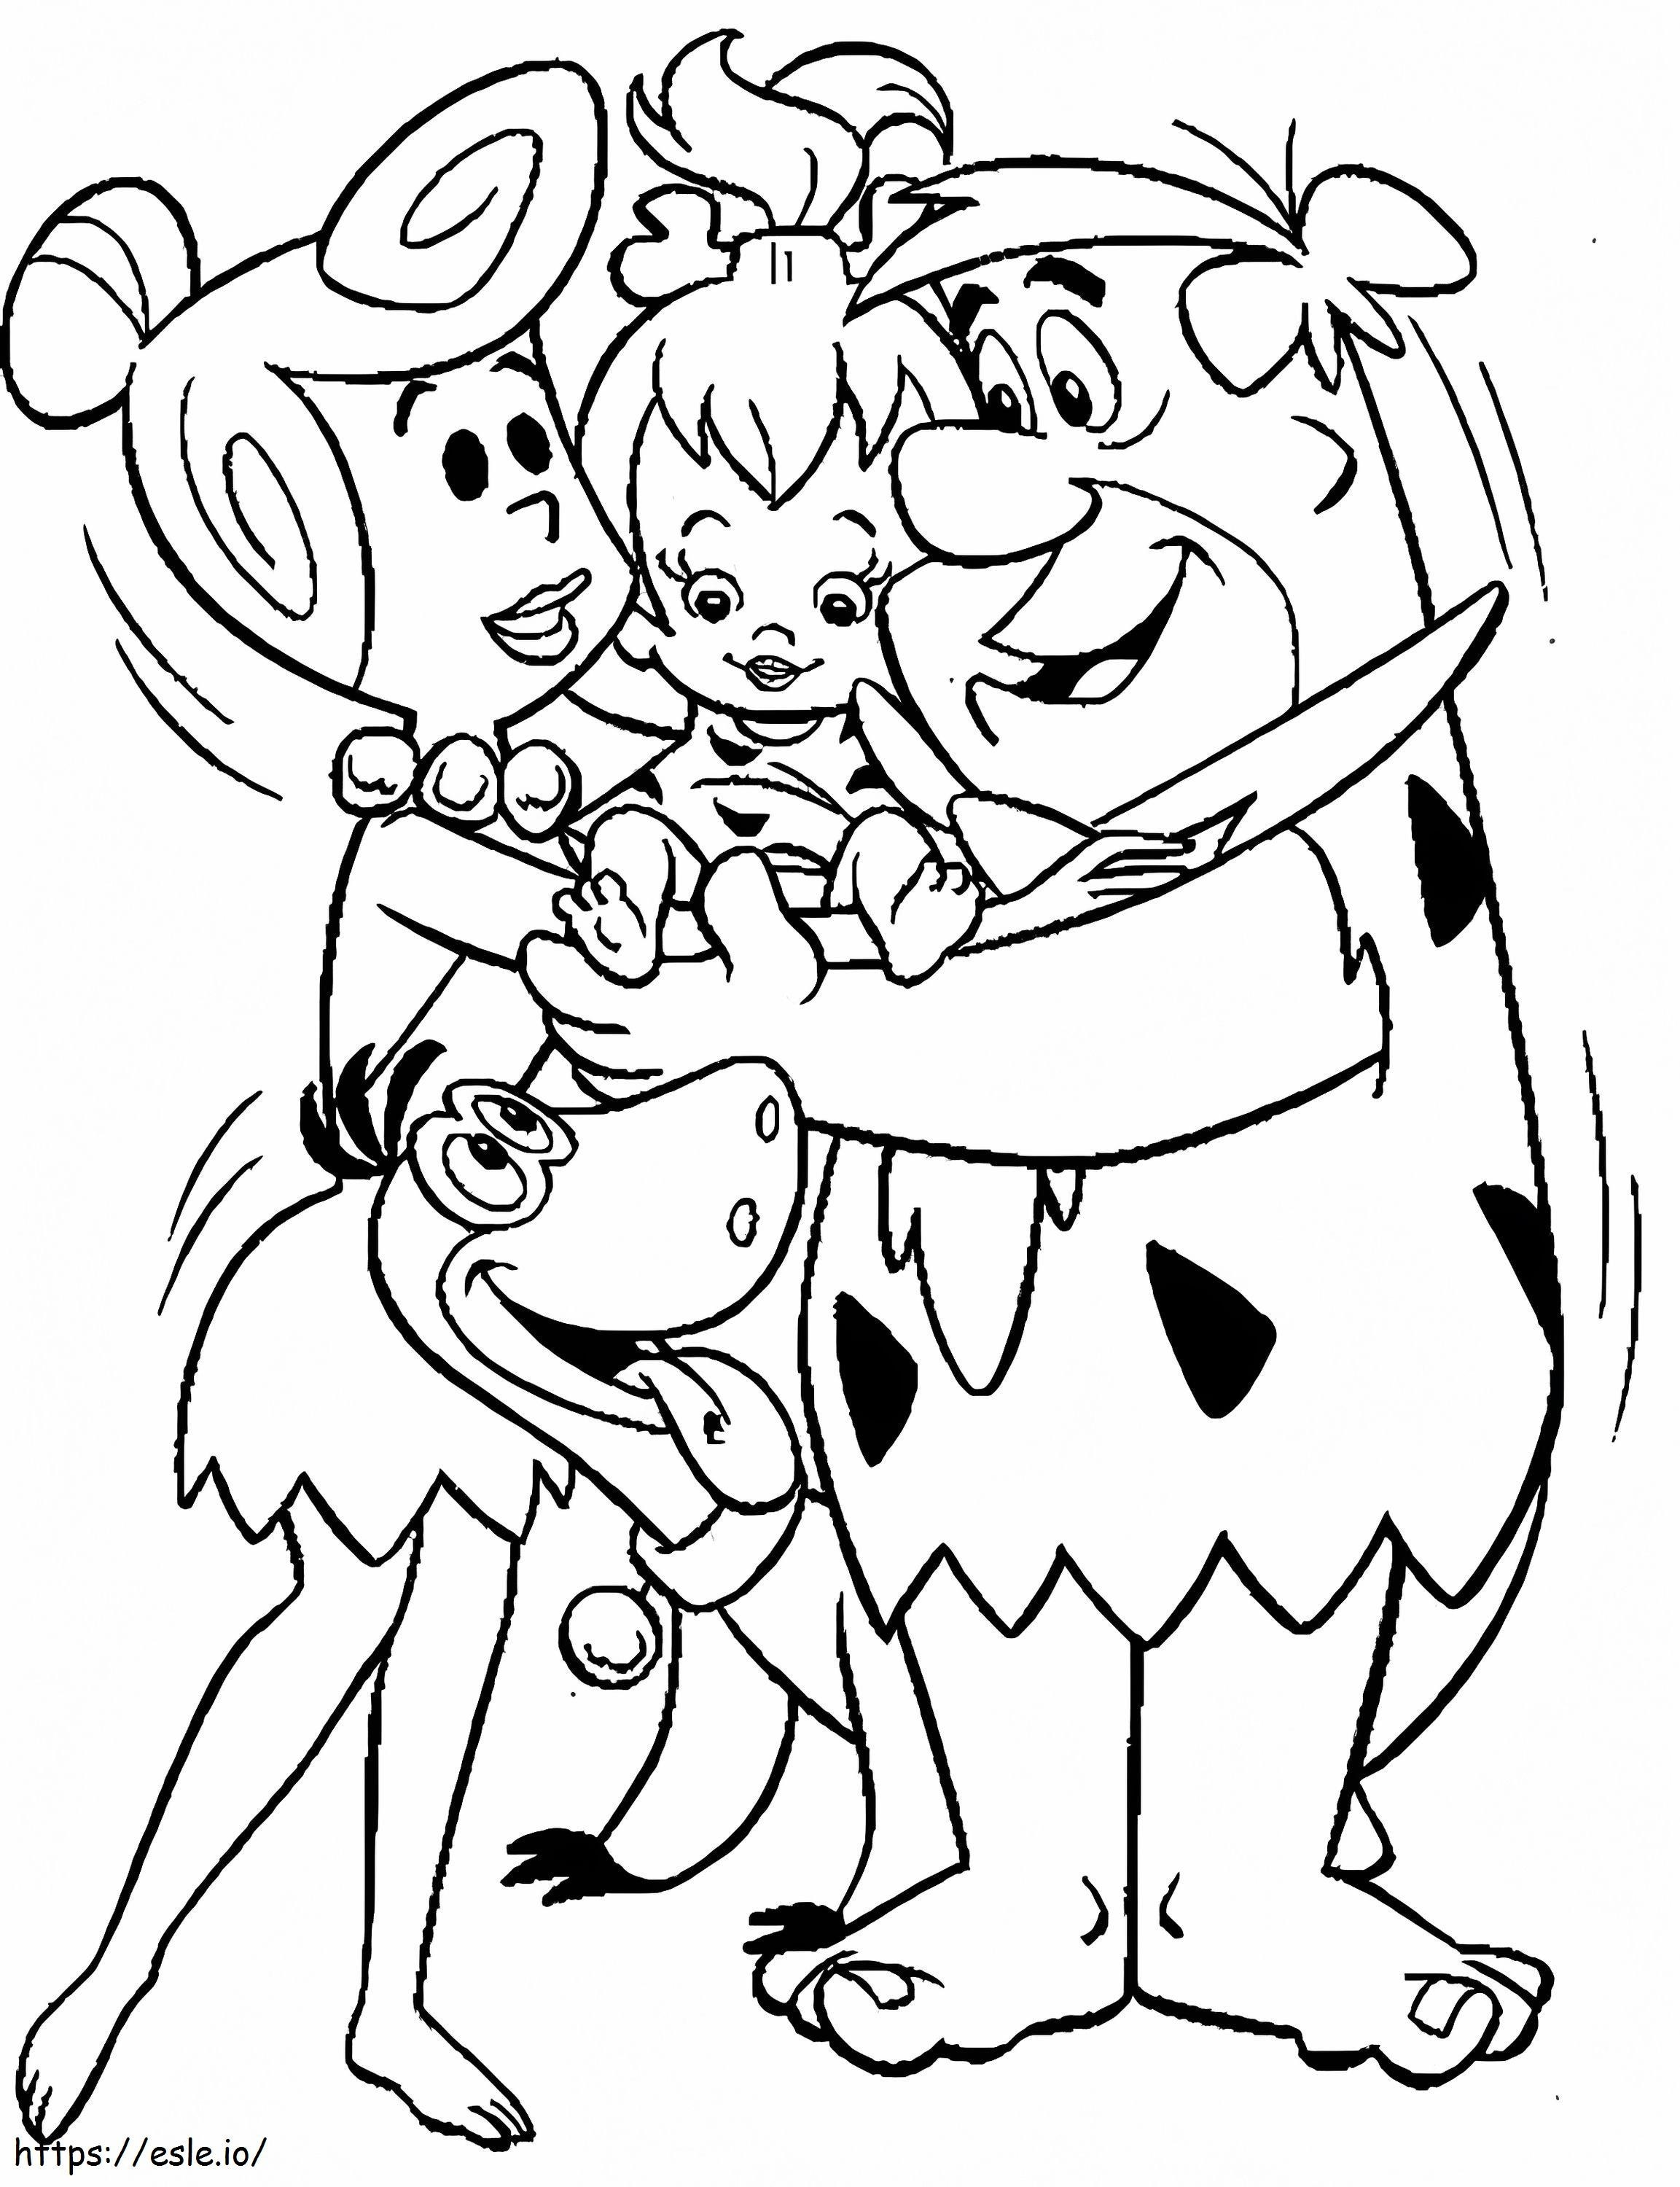 Fred Flintstones With Family coloring page